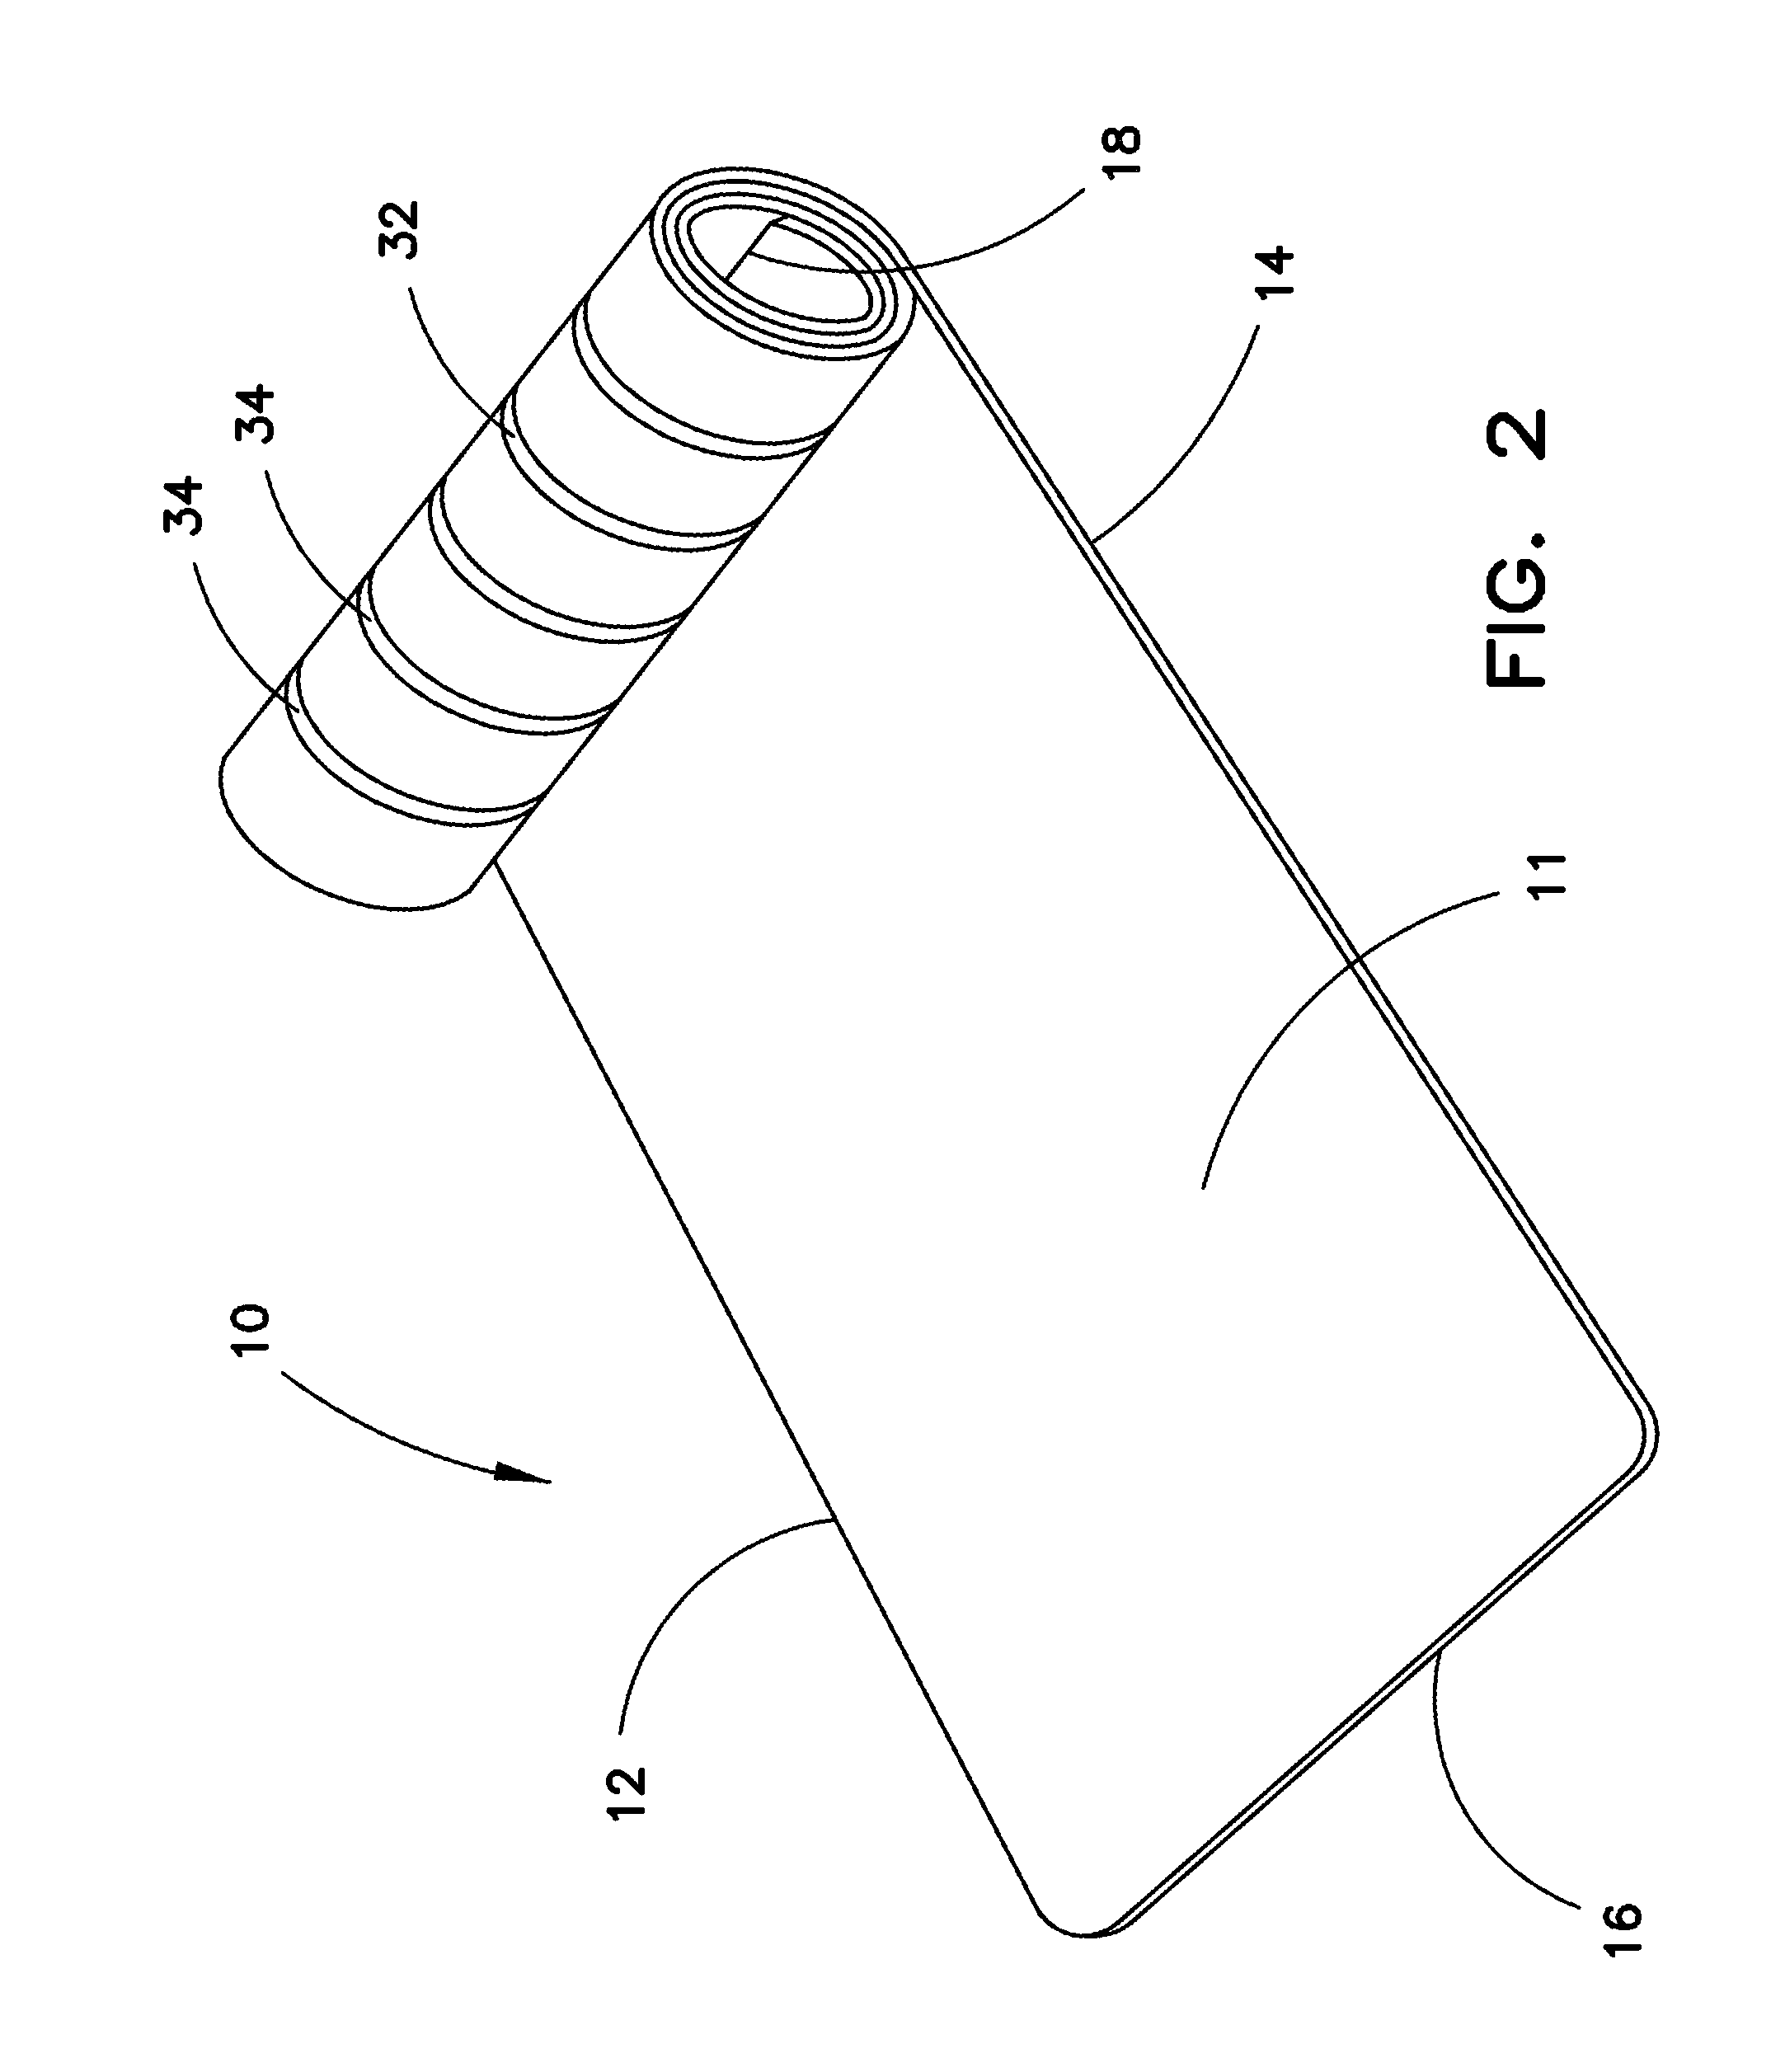 Protective mat with bottom surface having enhanced coefficient of friction